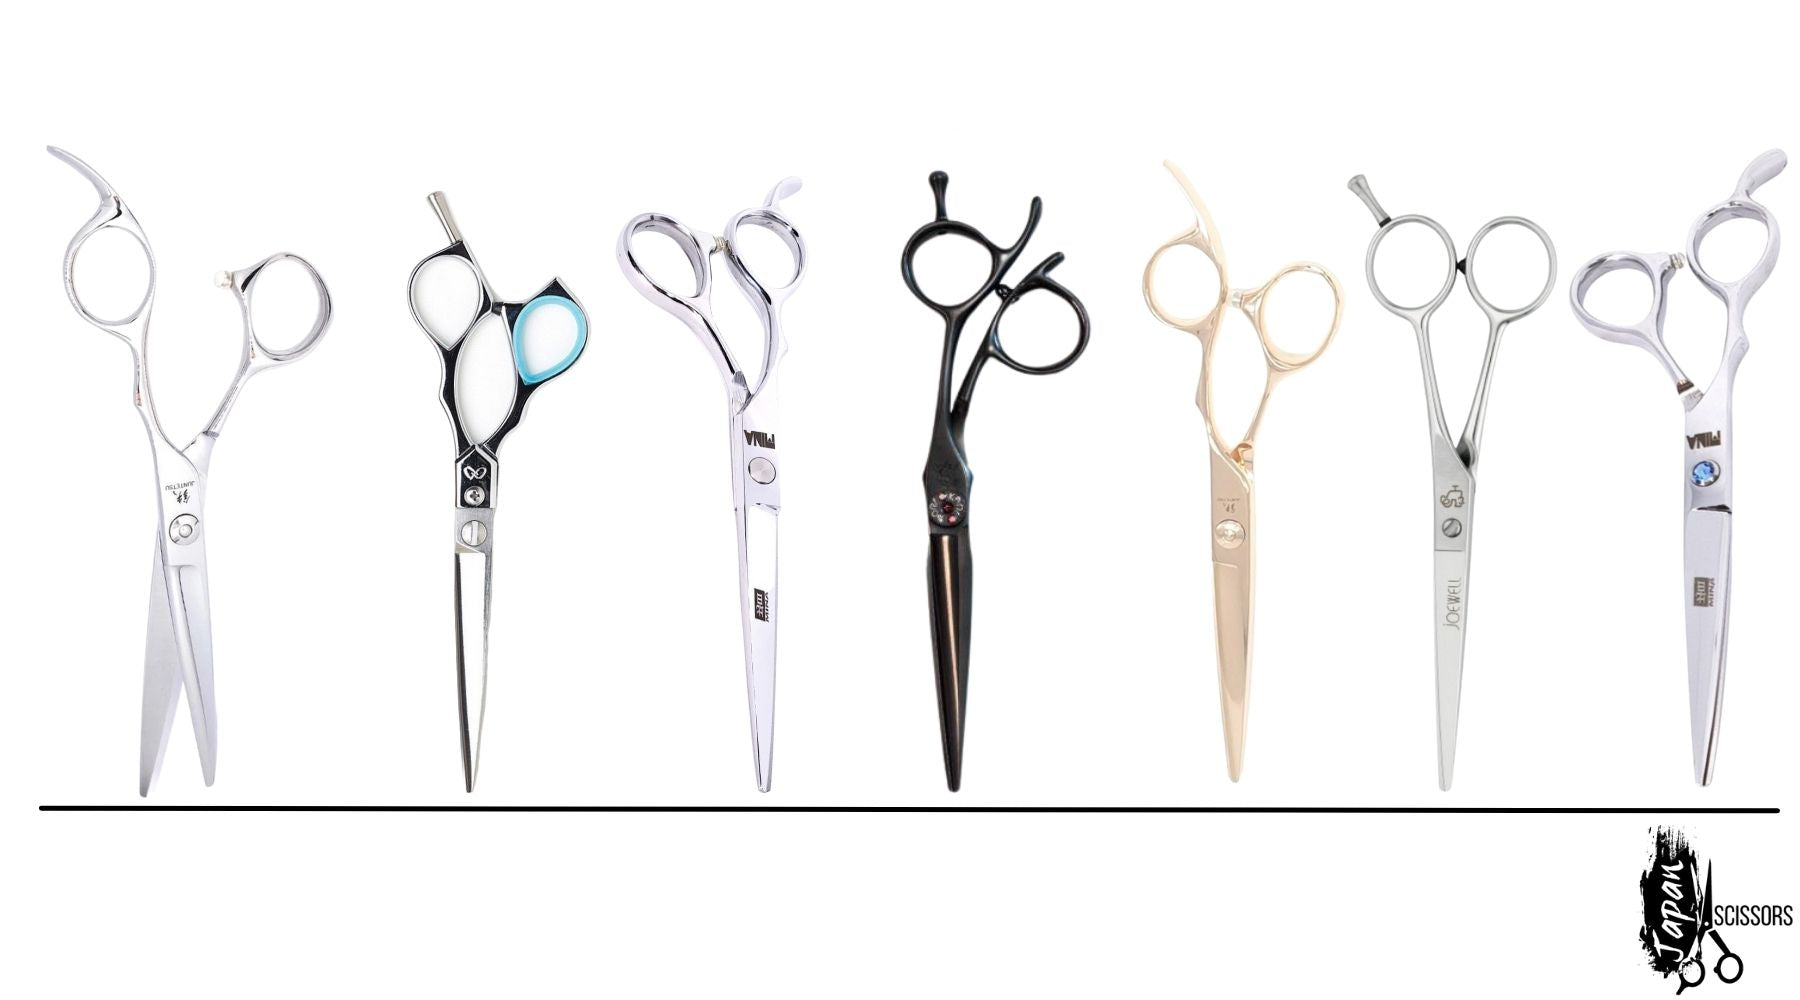 A collection of the best Japanese hairdressing shears for professional hairstylists